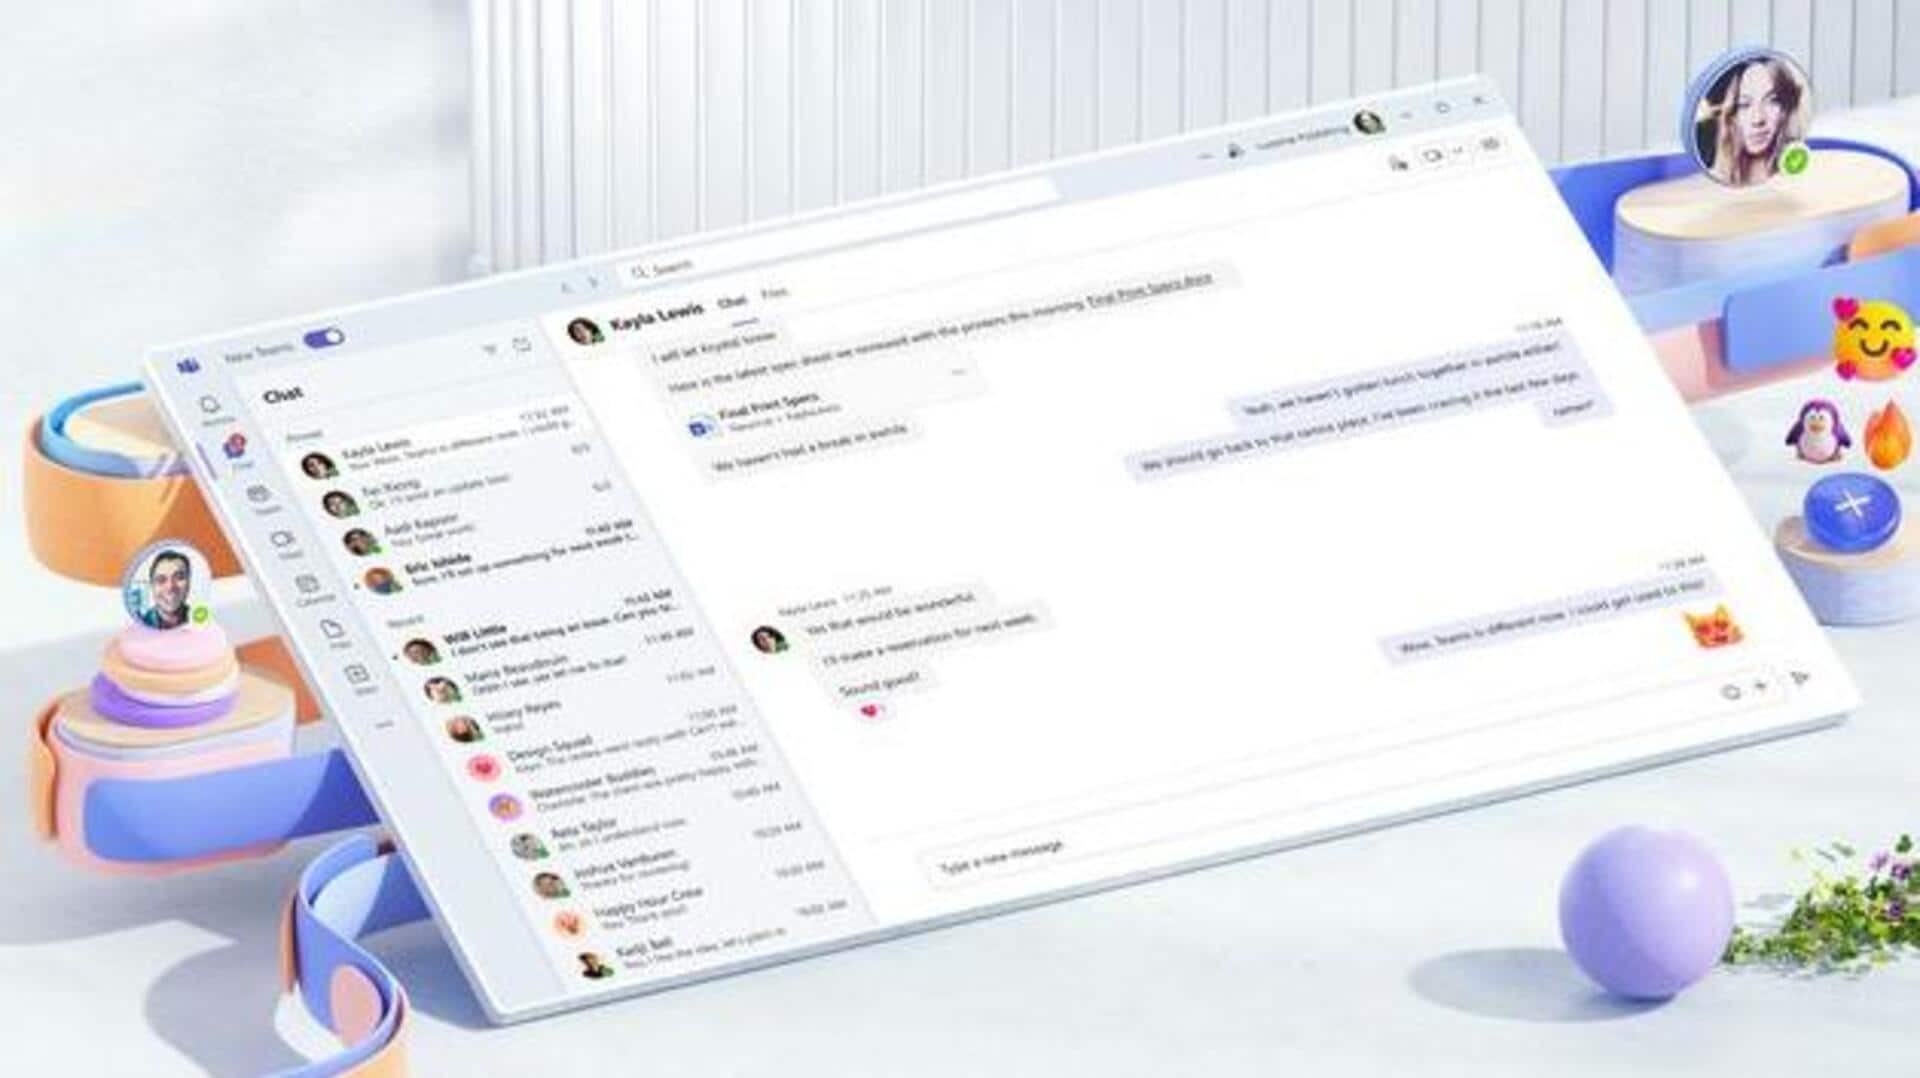 New Microsoft Teams app is faster, more efficient: Check features